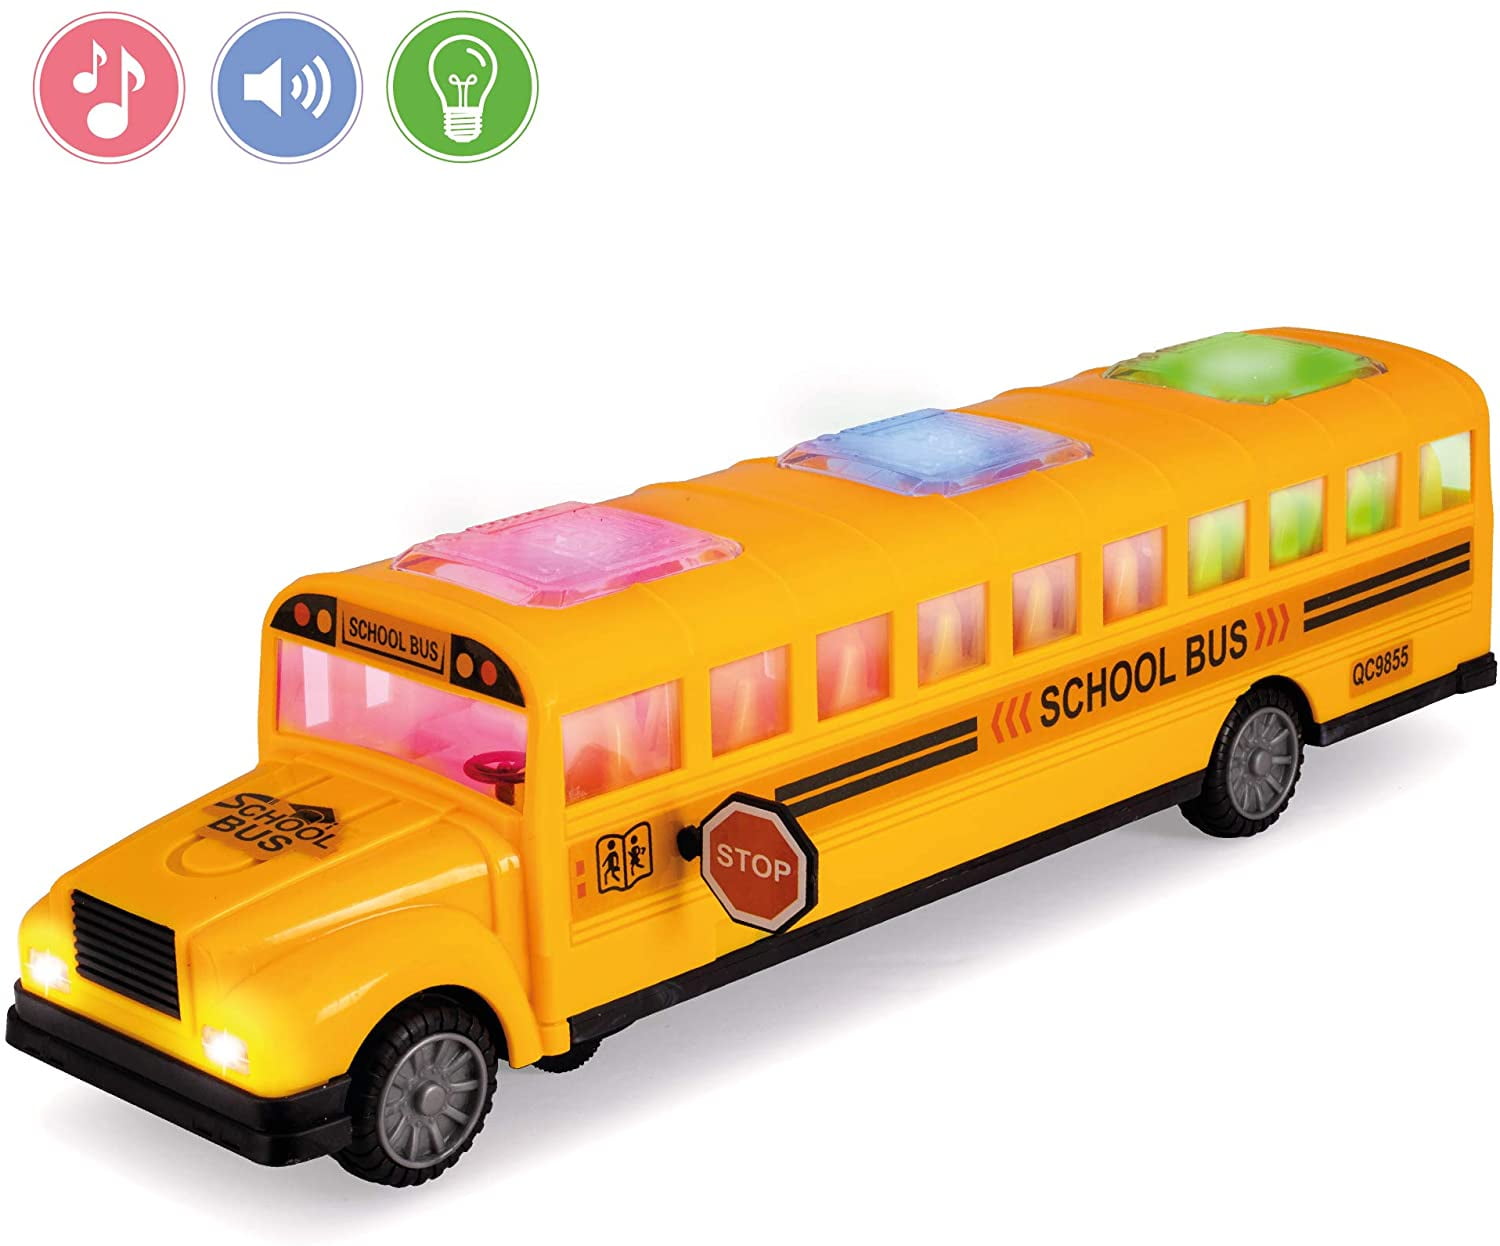 Baby Inertia Toys Creative Model Toy School Bus with Flashing Lights and Sounds for Baby Chirstmas Gift